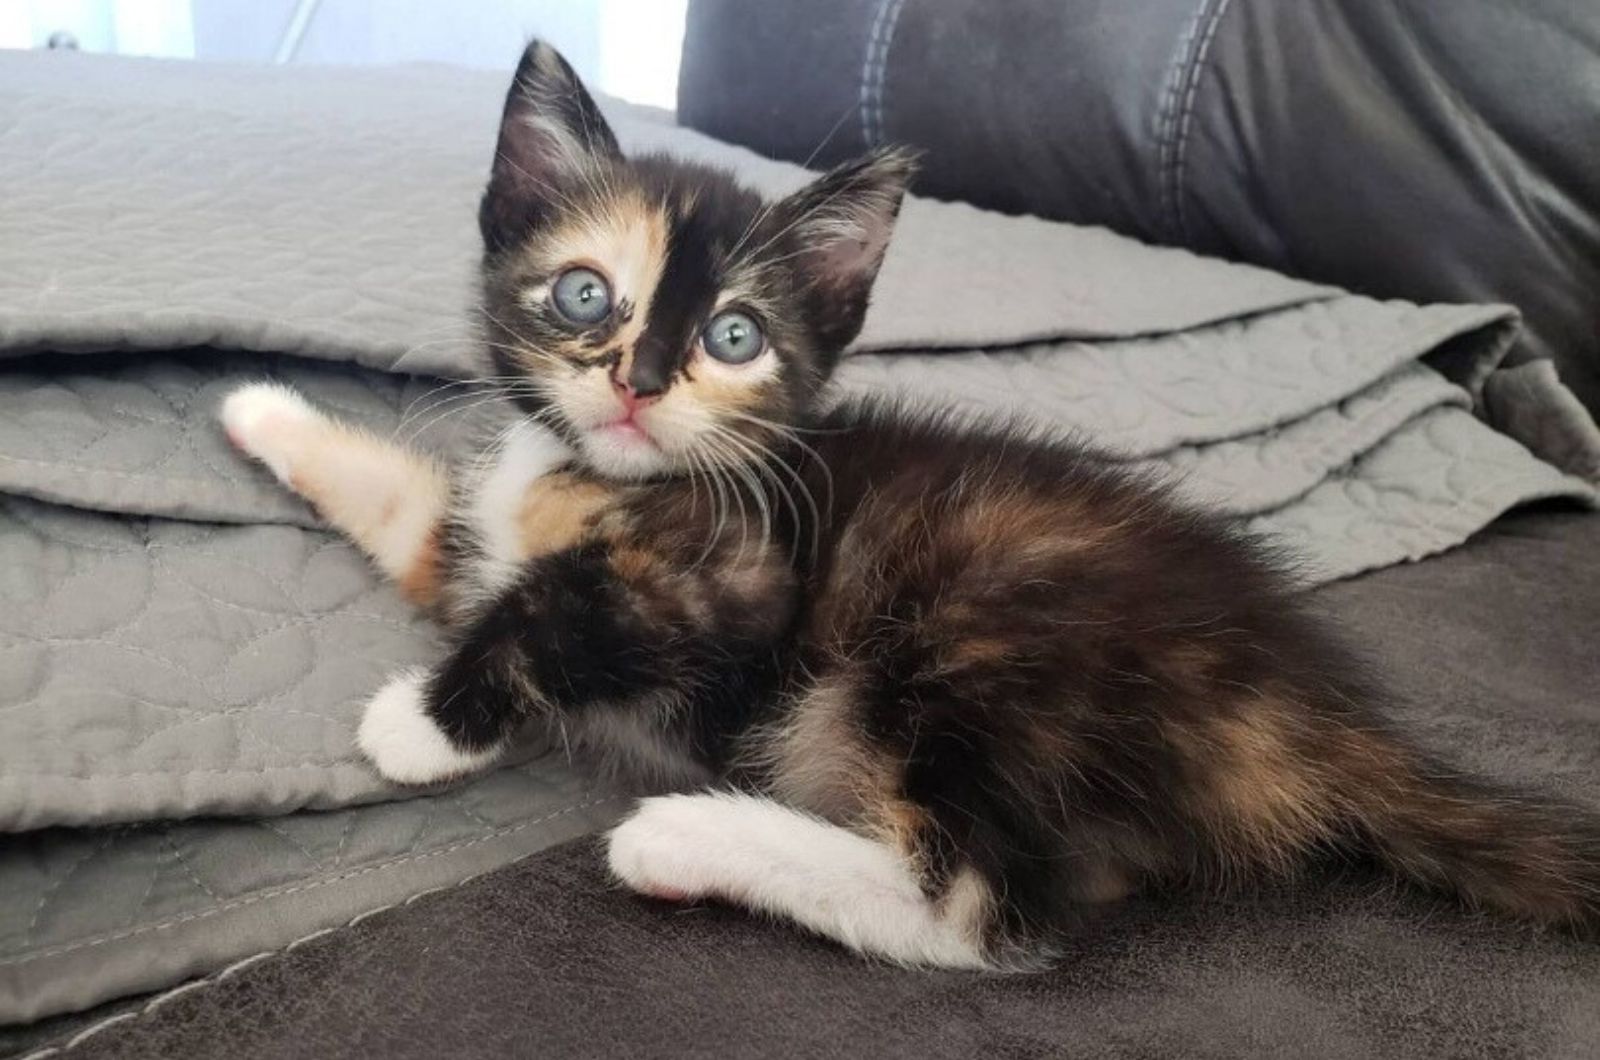 tiny kitten lying on couch